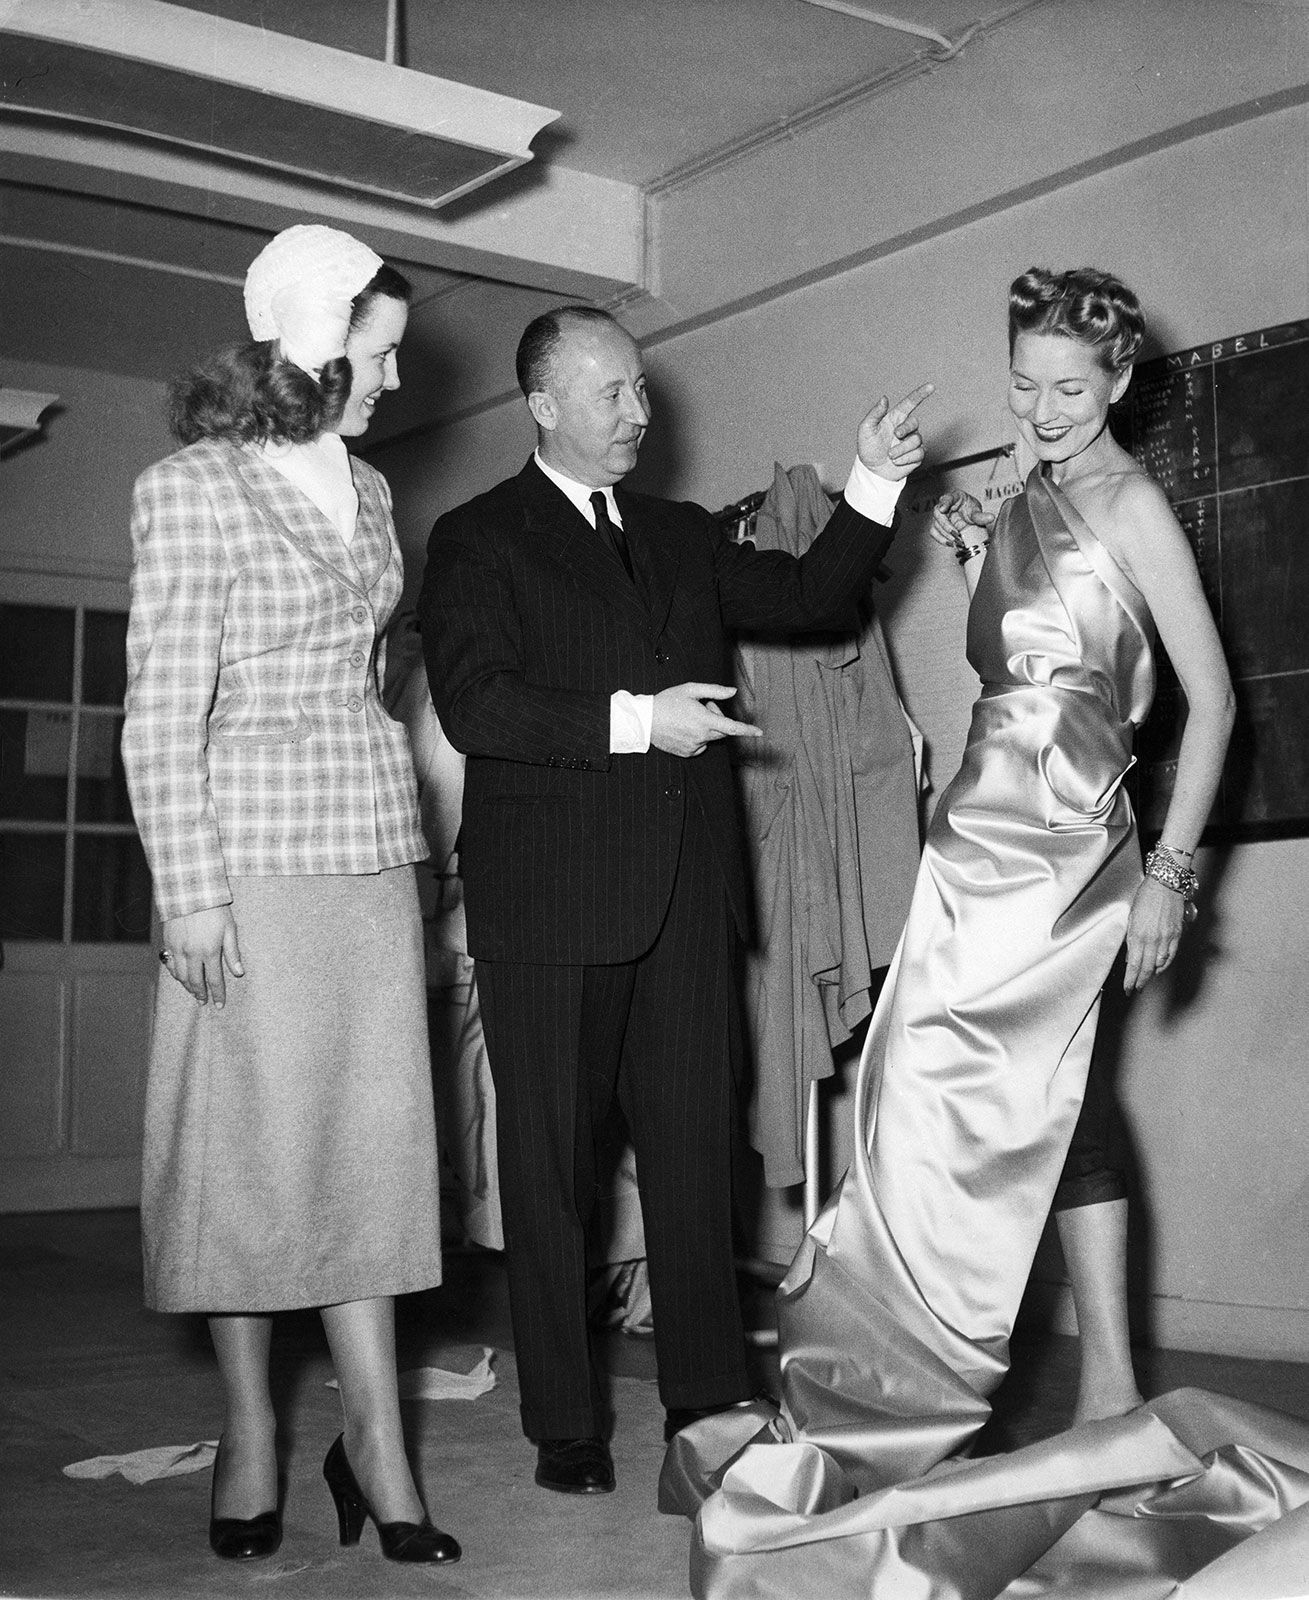 Dior is pictured here in his fashion studio, making adjustments on a fit model.